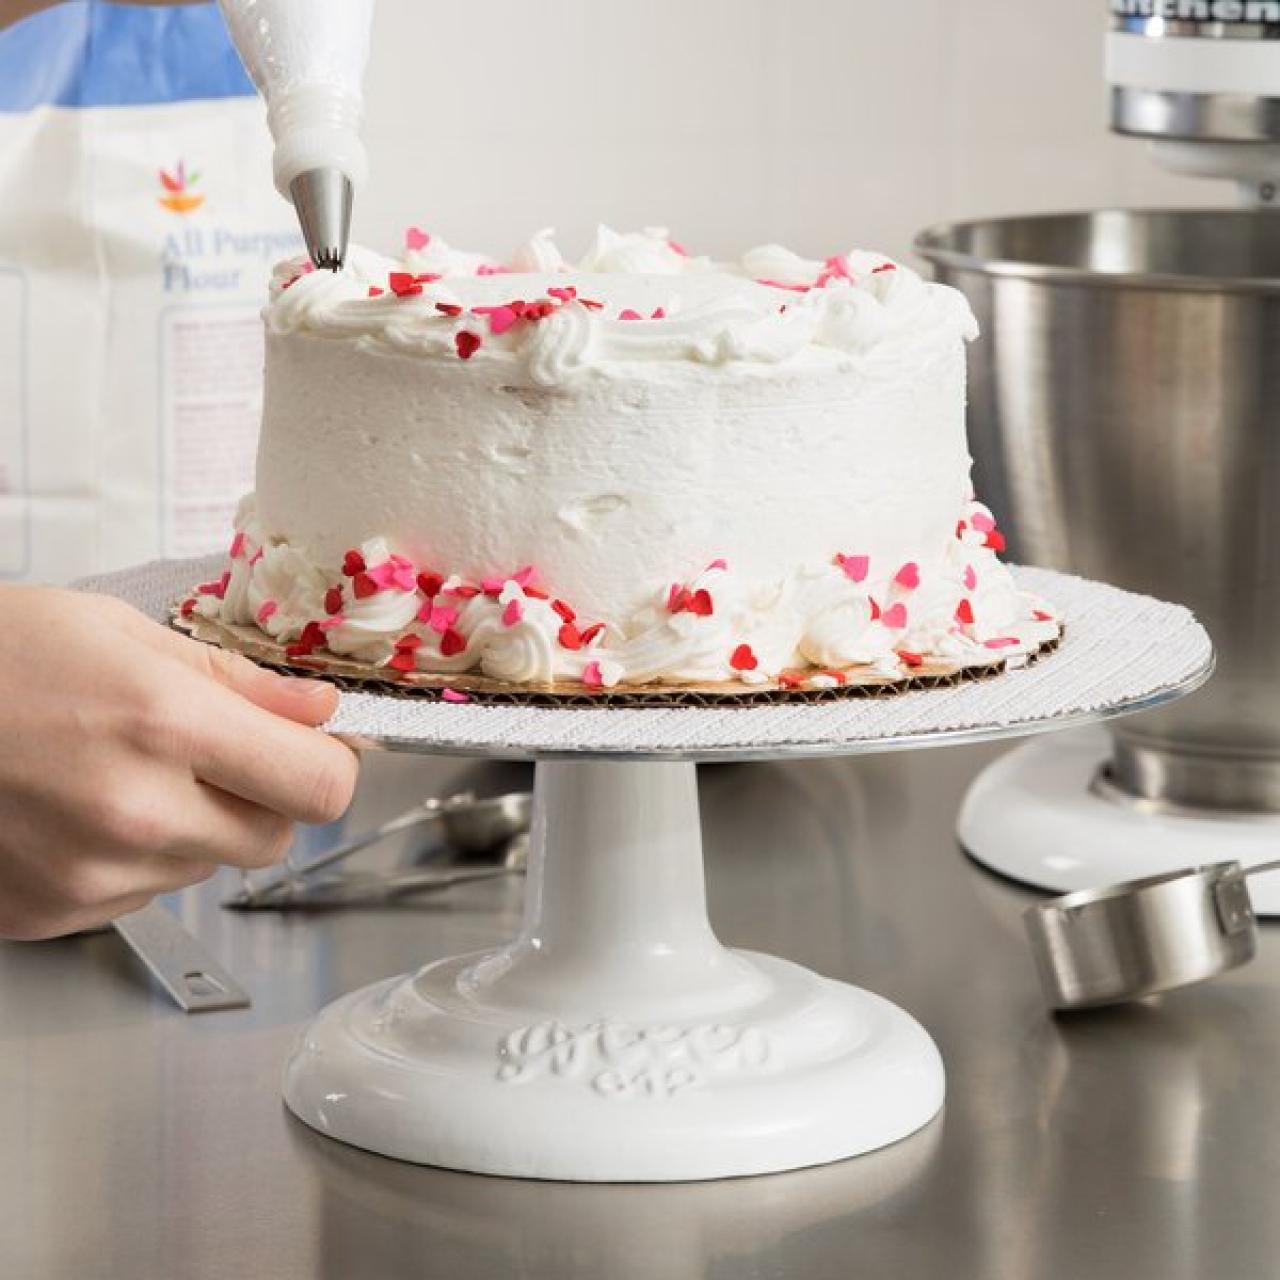 How to make Turntable for cakes at home? No Turntable No issue - Make Your  Turntable for icing Cakes 